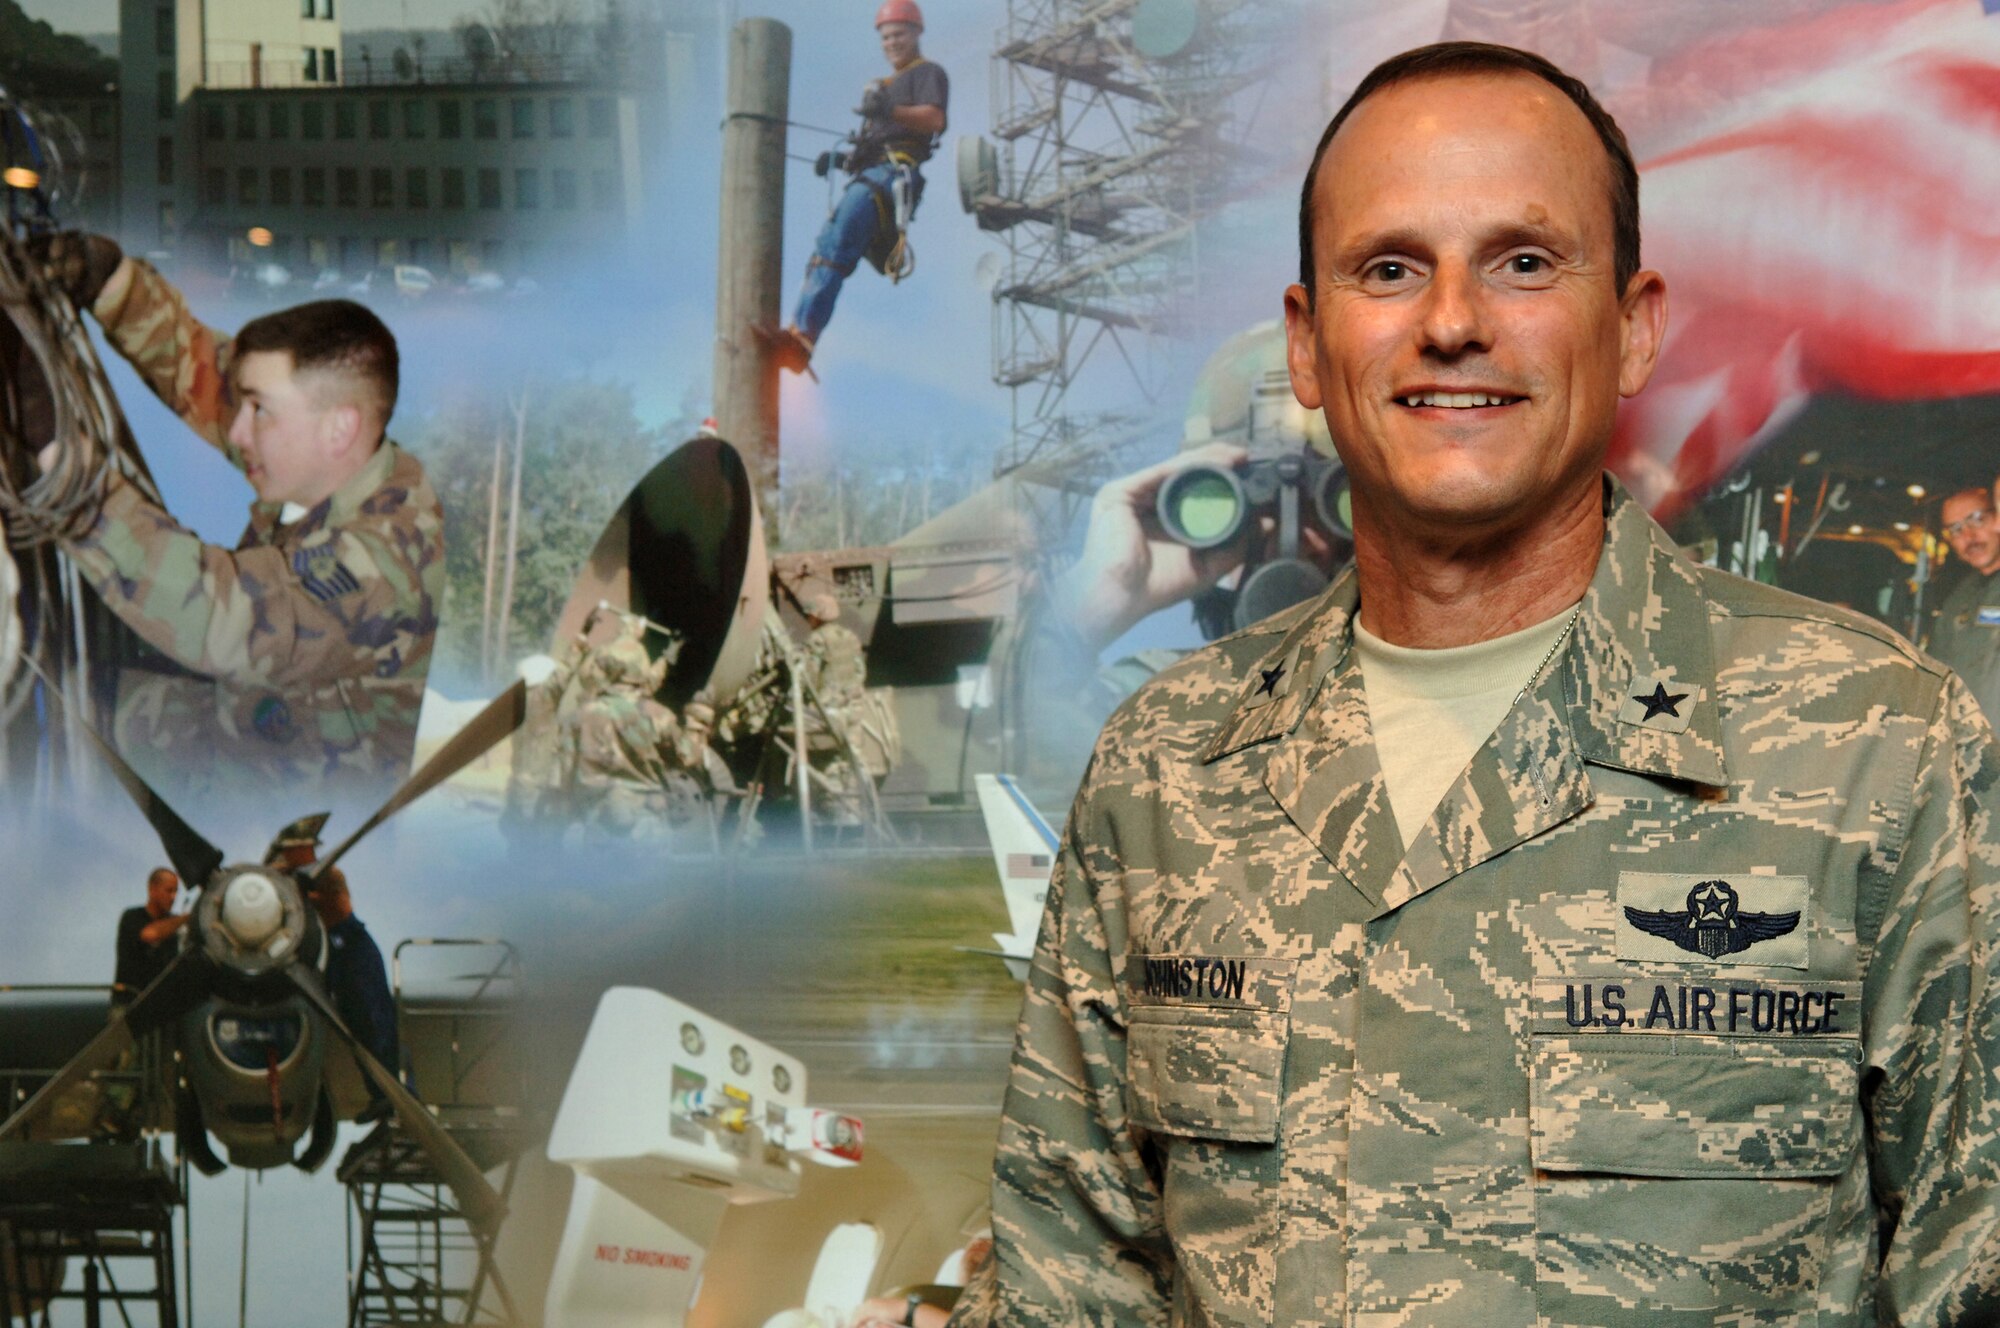 Brig. Gen. Rich Johnston, 86th Airlift Wing commander, will relieve command to Col. William Bender Dec. 19 at a change of command ceremony in Hangar 1 on Ramstein at 10 a.m. Lt. Gen. Rod Bishop, 3rd Air Force commander, will preside over the ceremony.  